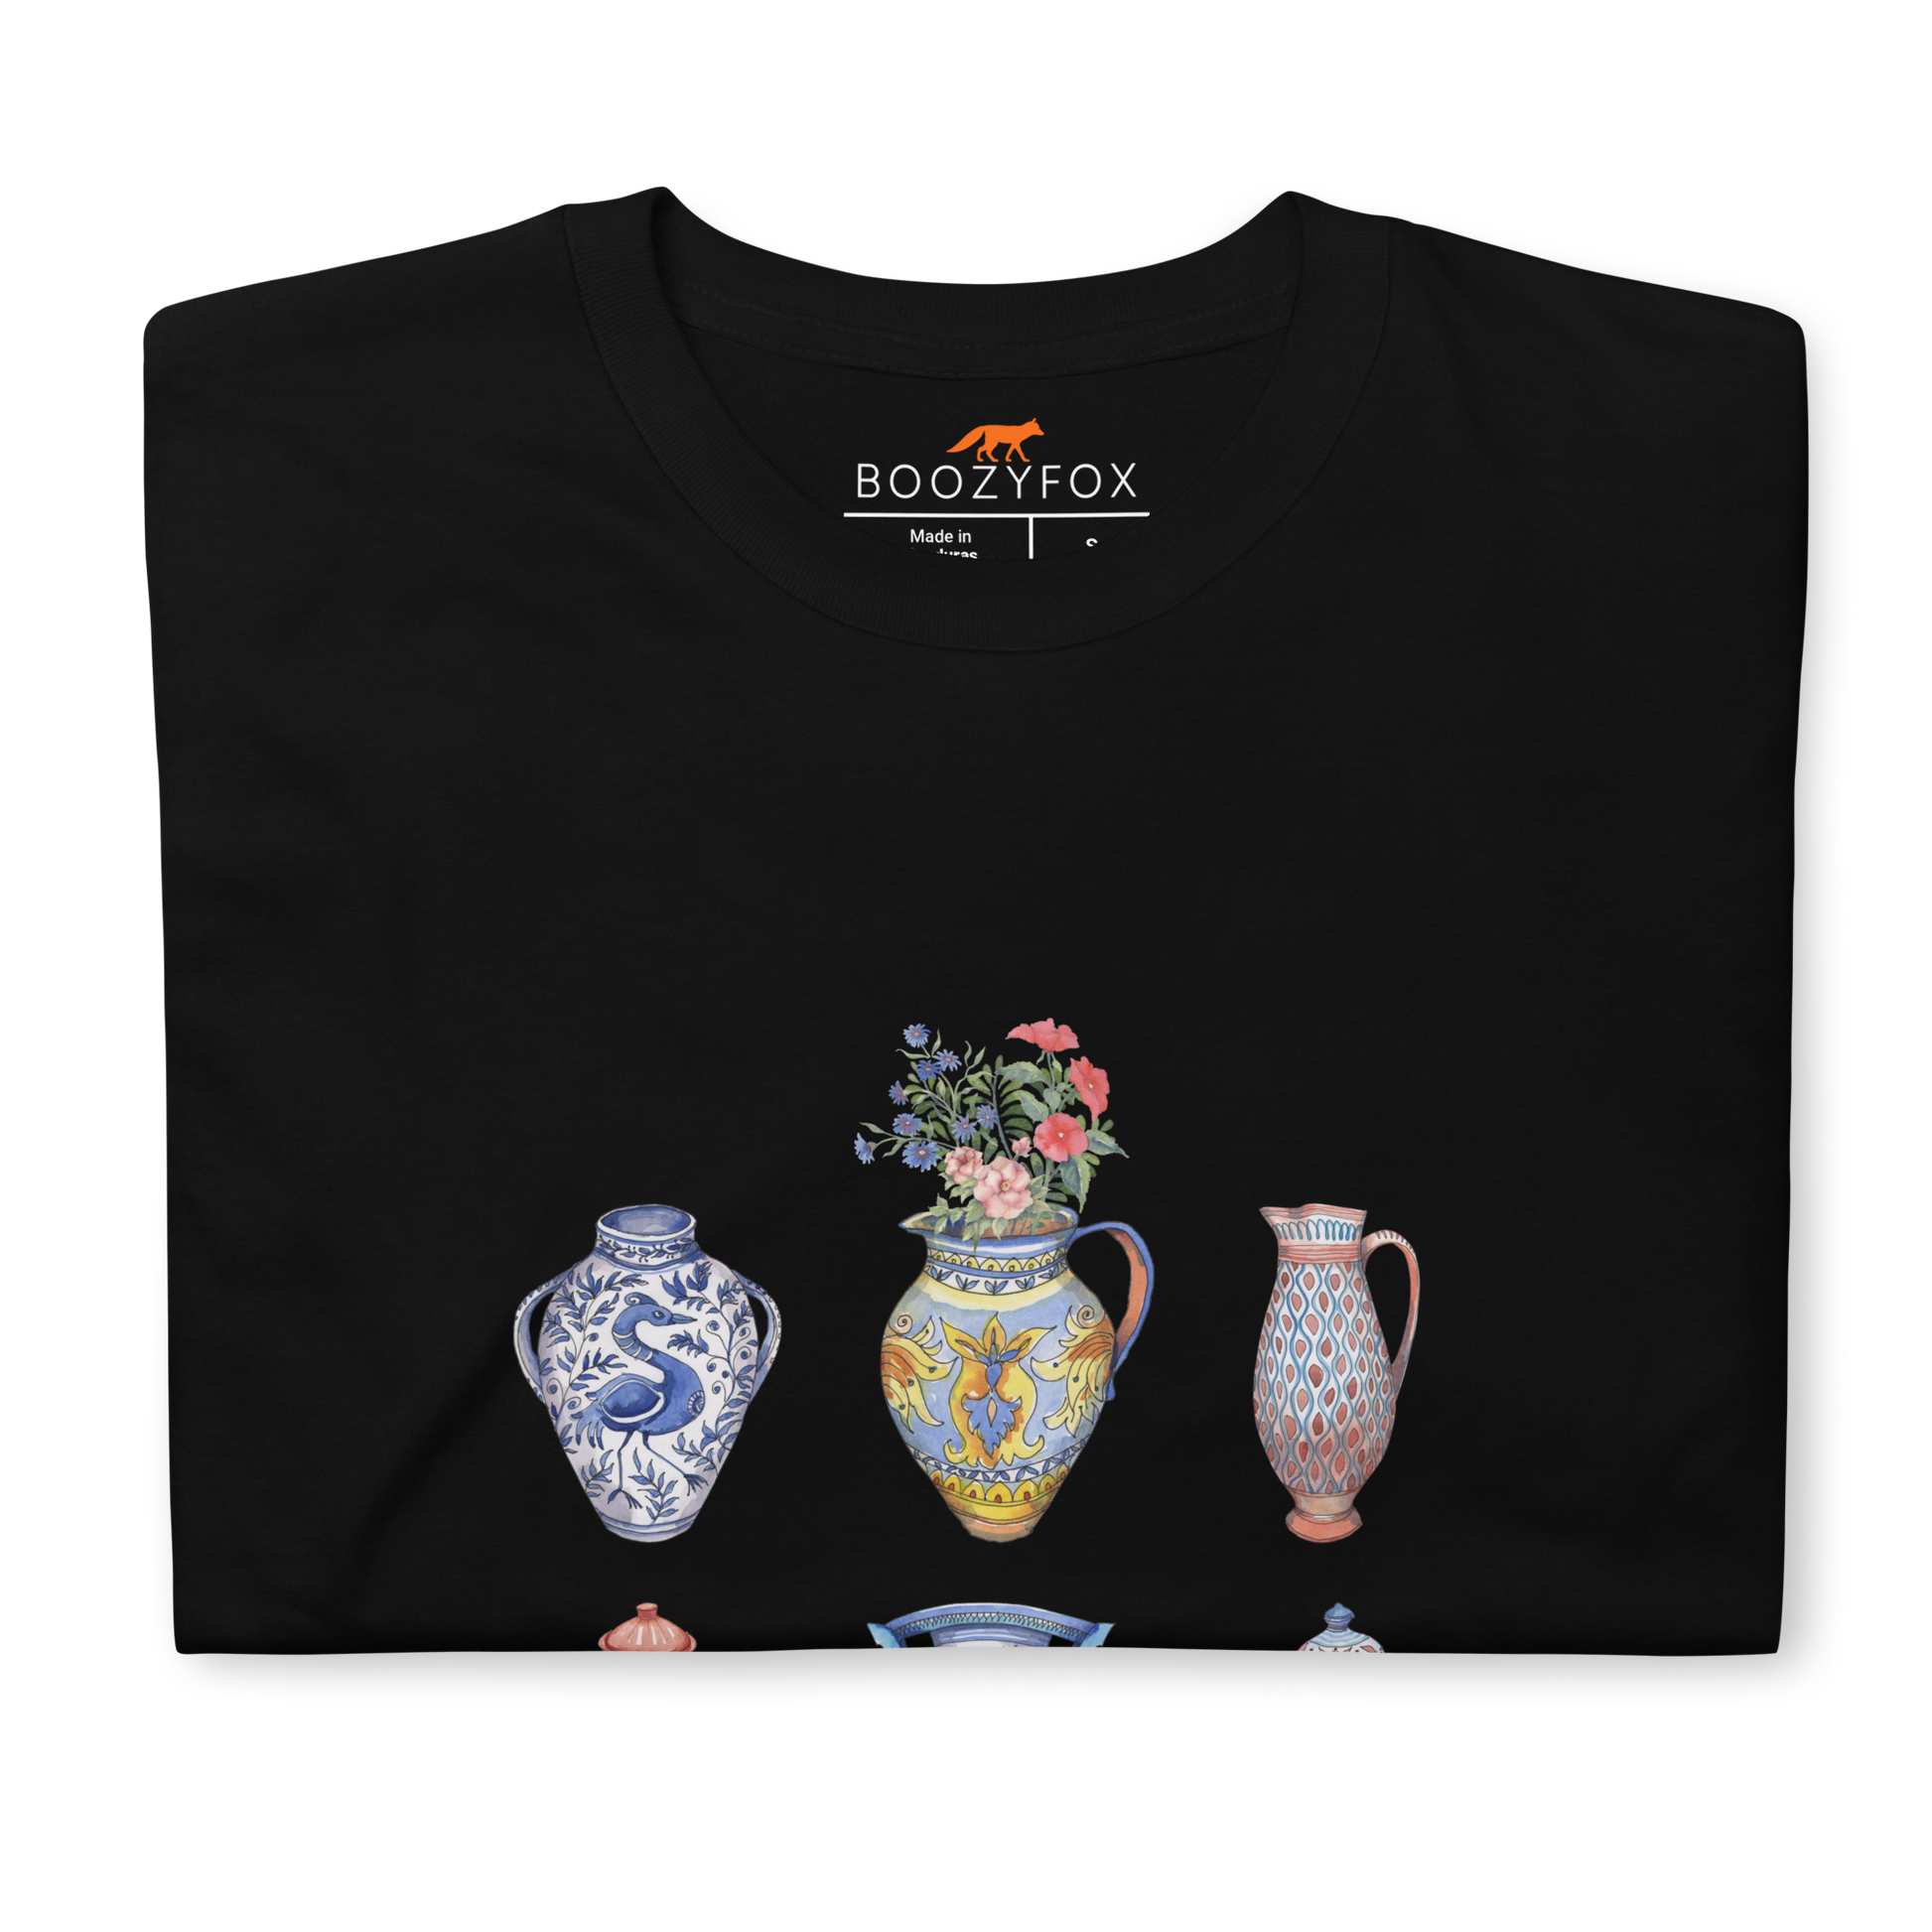 Front details of a Black Vase T-Shirt featuring a chic vase graphic on the chest - Artsy Graphic Vase T-Shirts - Boozy Fox